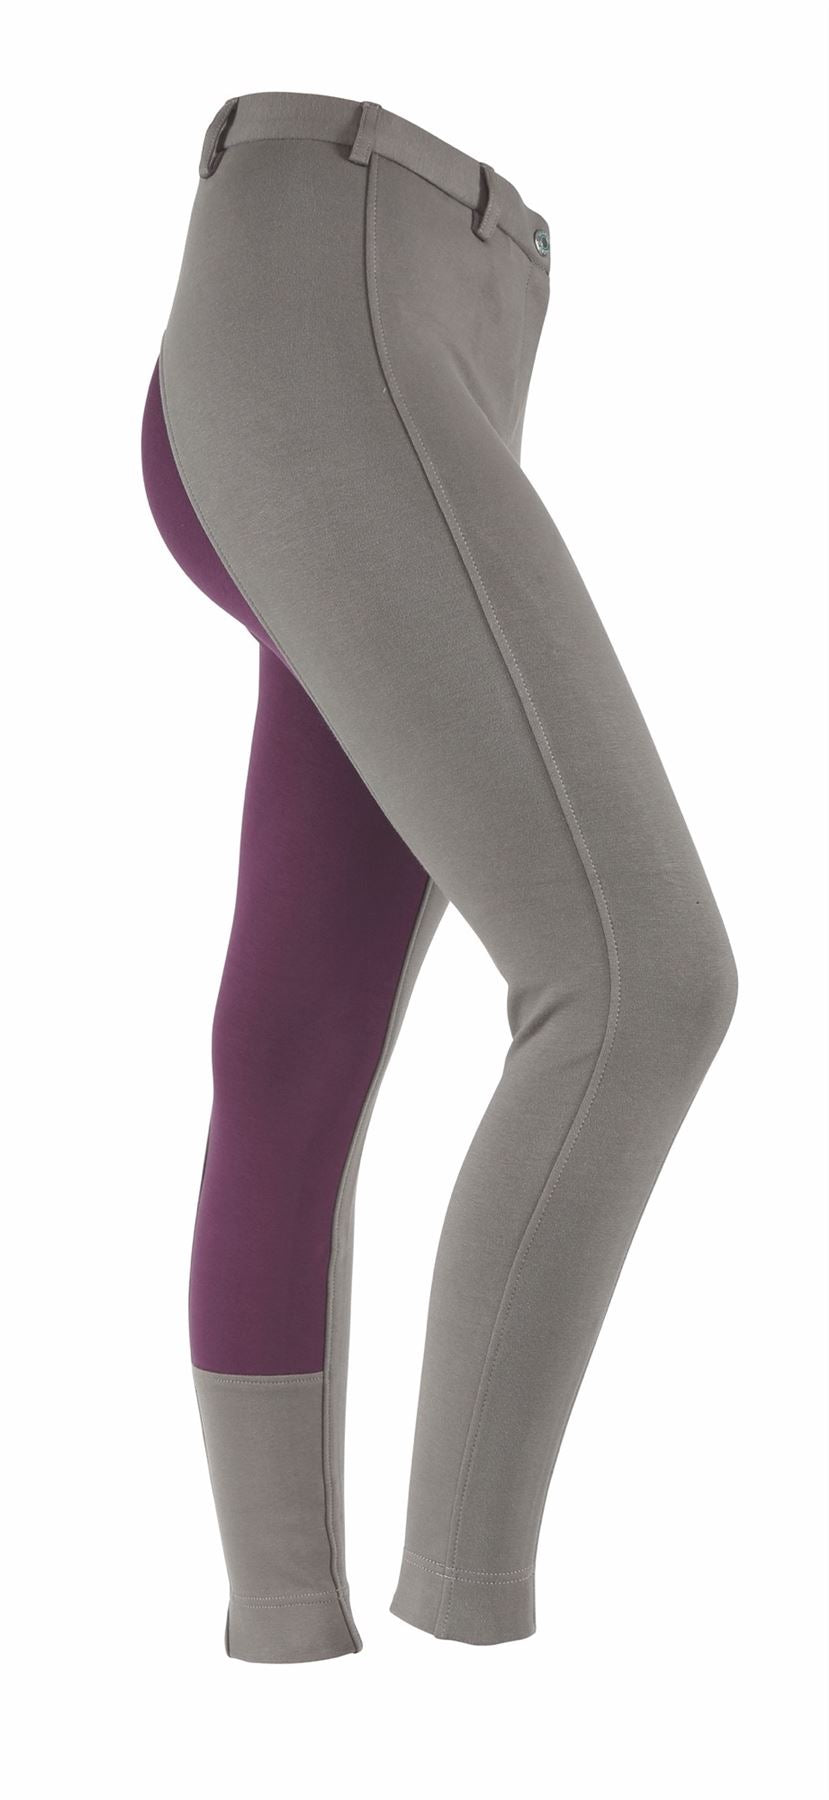 Shires Wessex Two Tone Jodhpurs - Ladies - Just Horse Riders